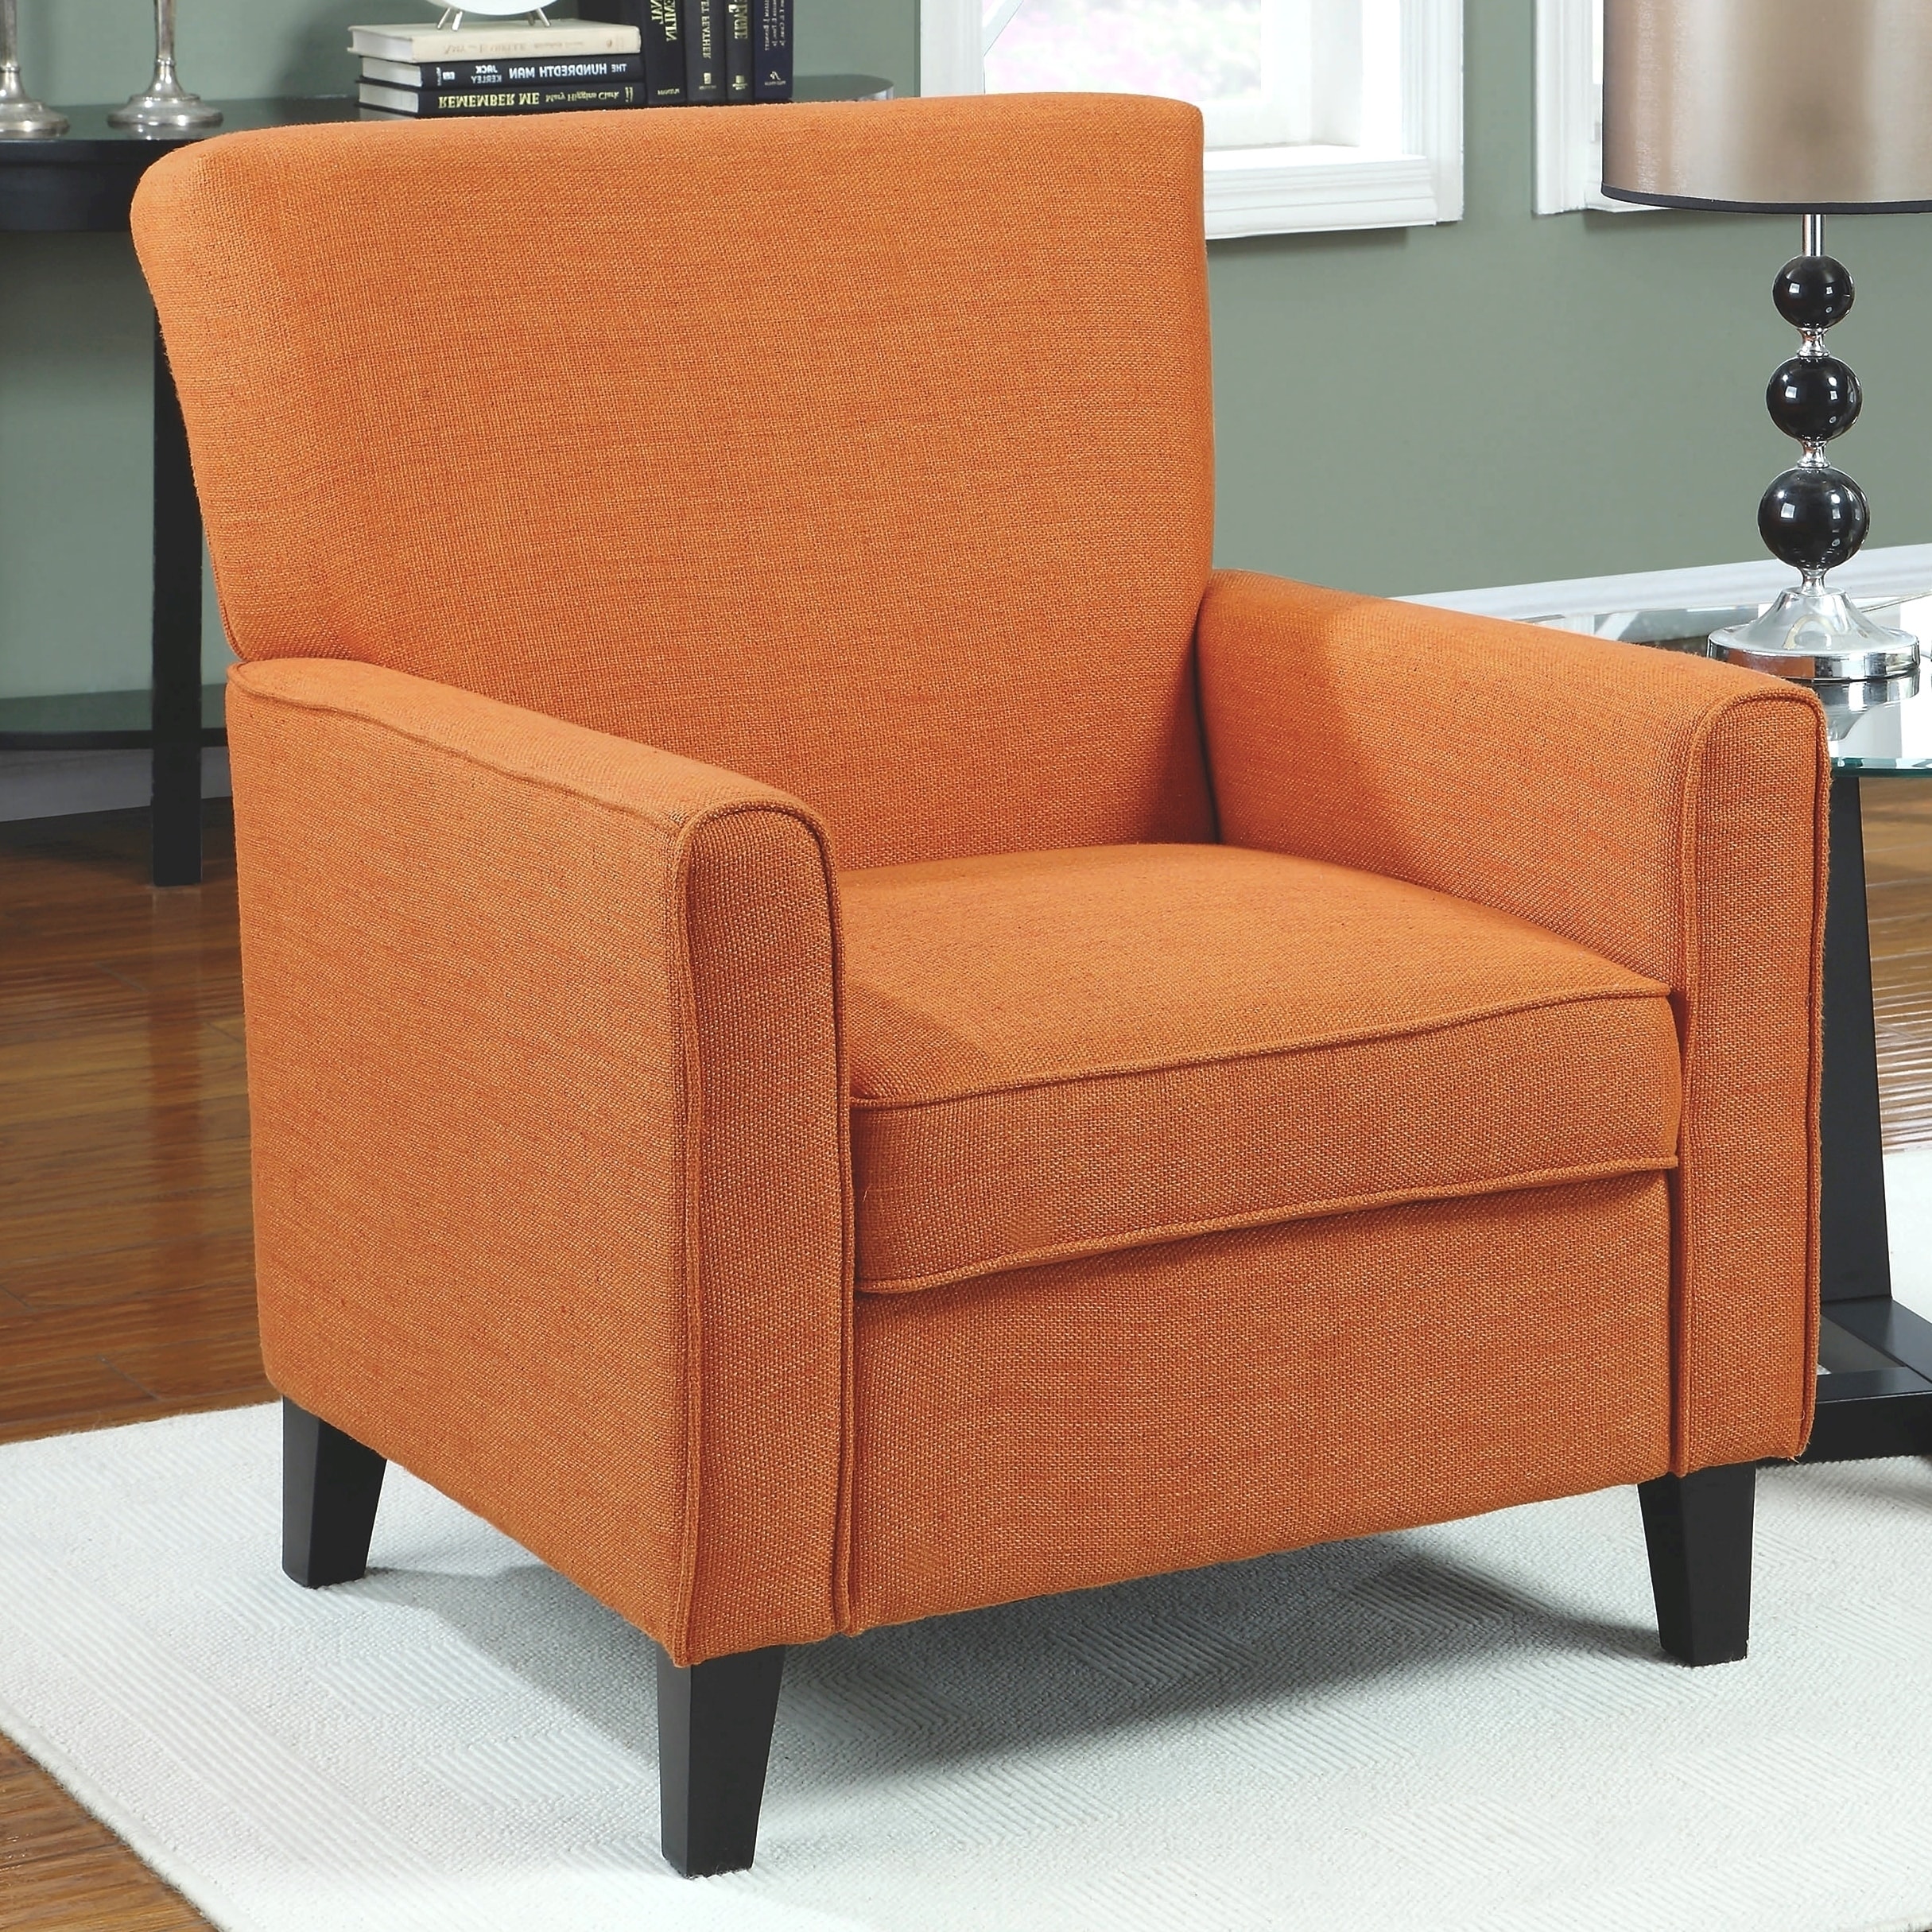 Orange Patterned Accent Chairs - img-hobo